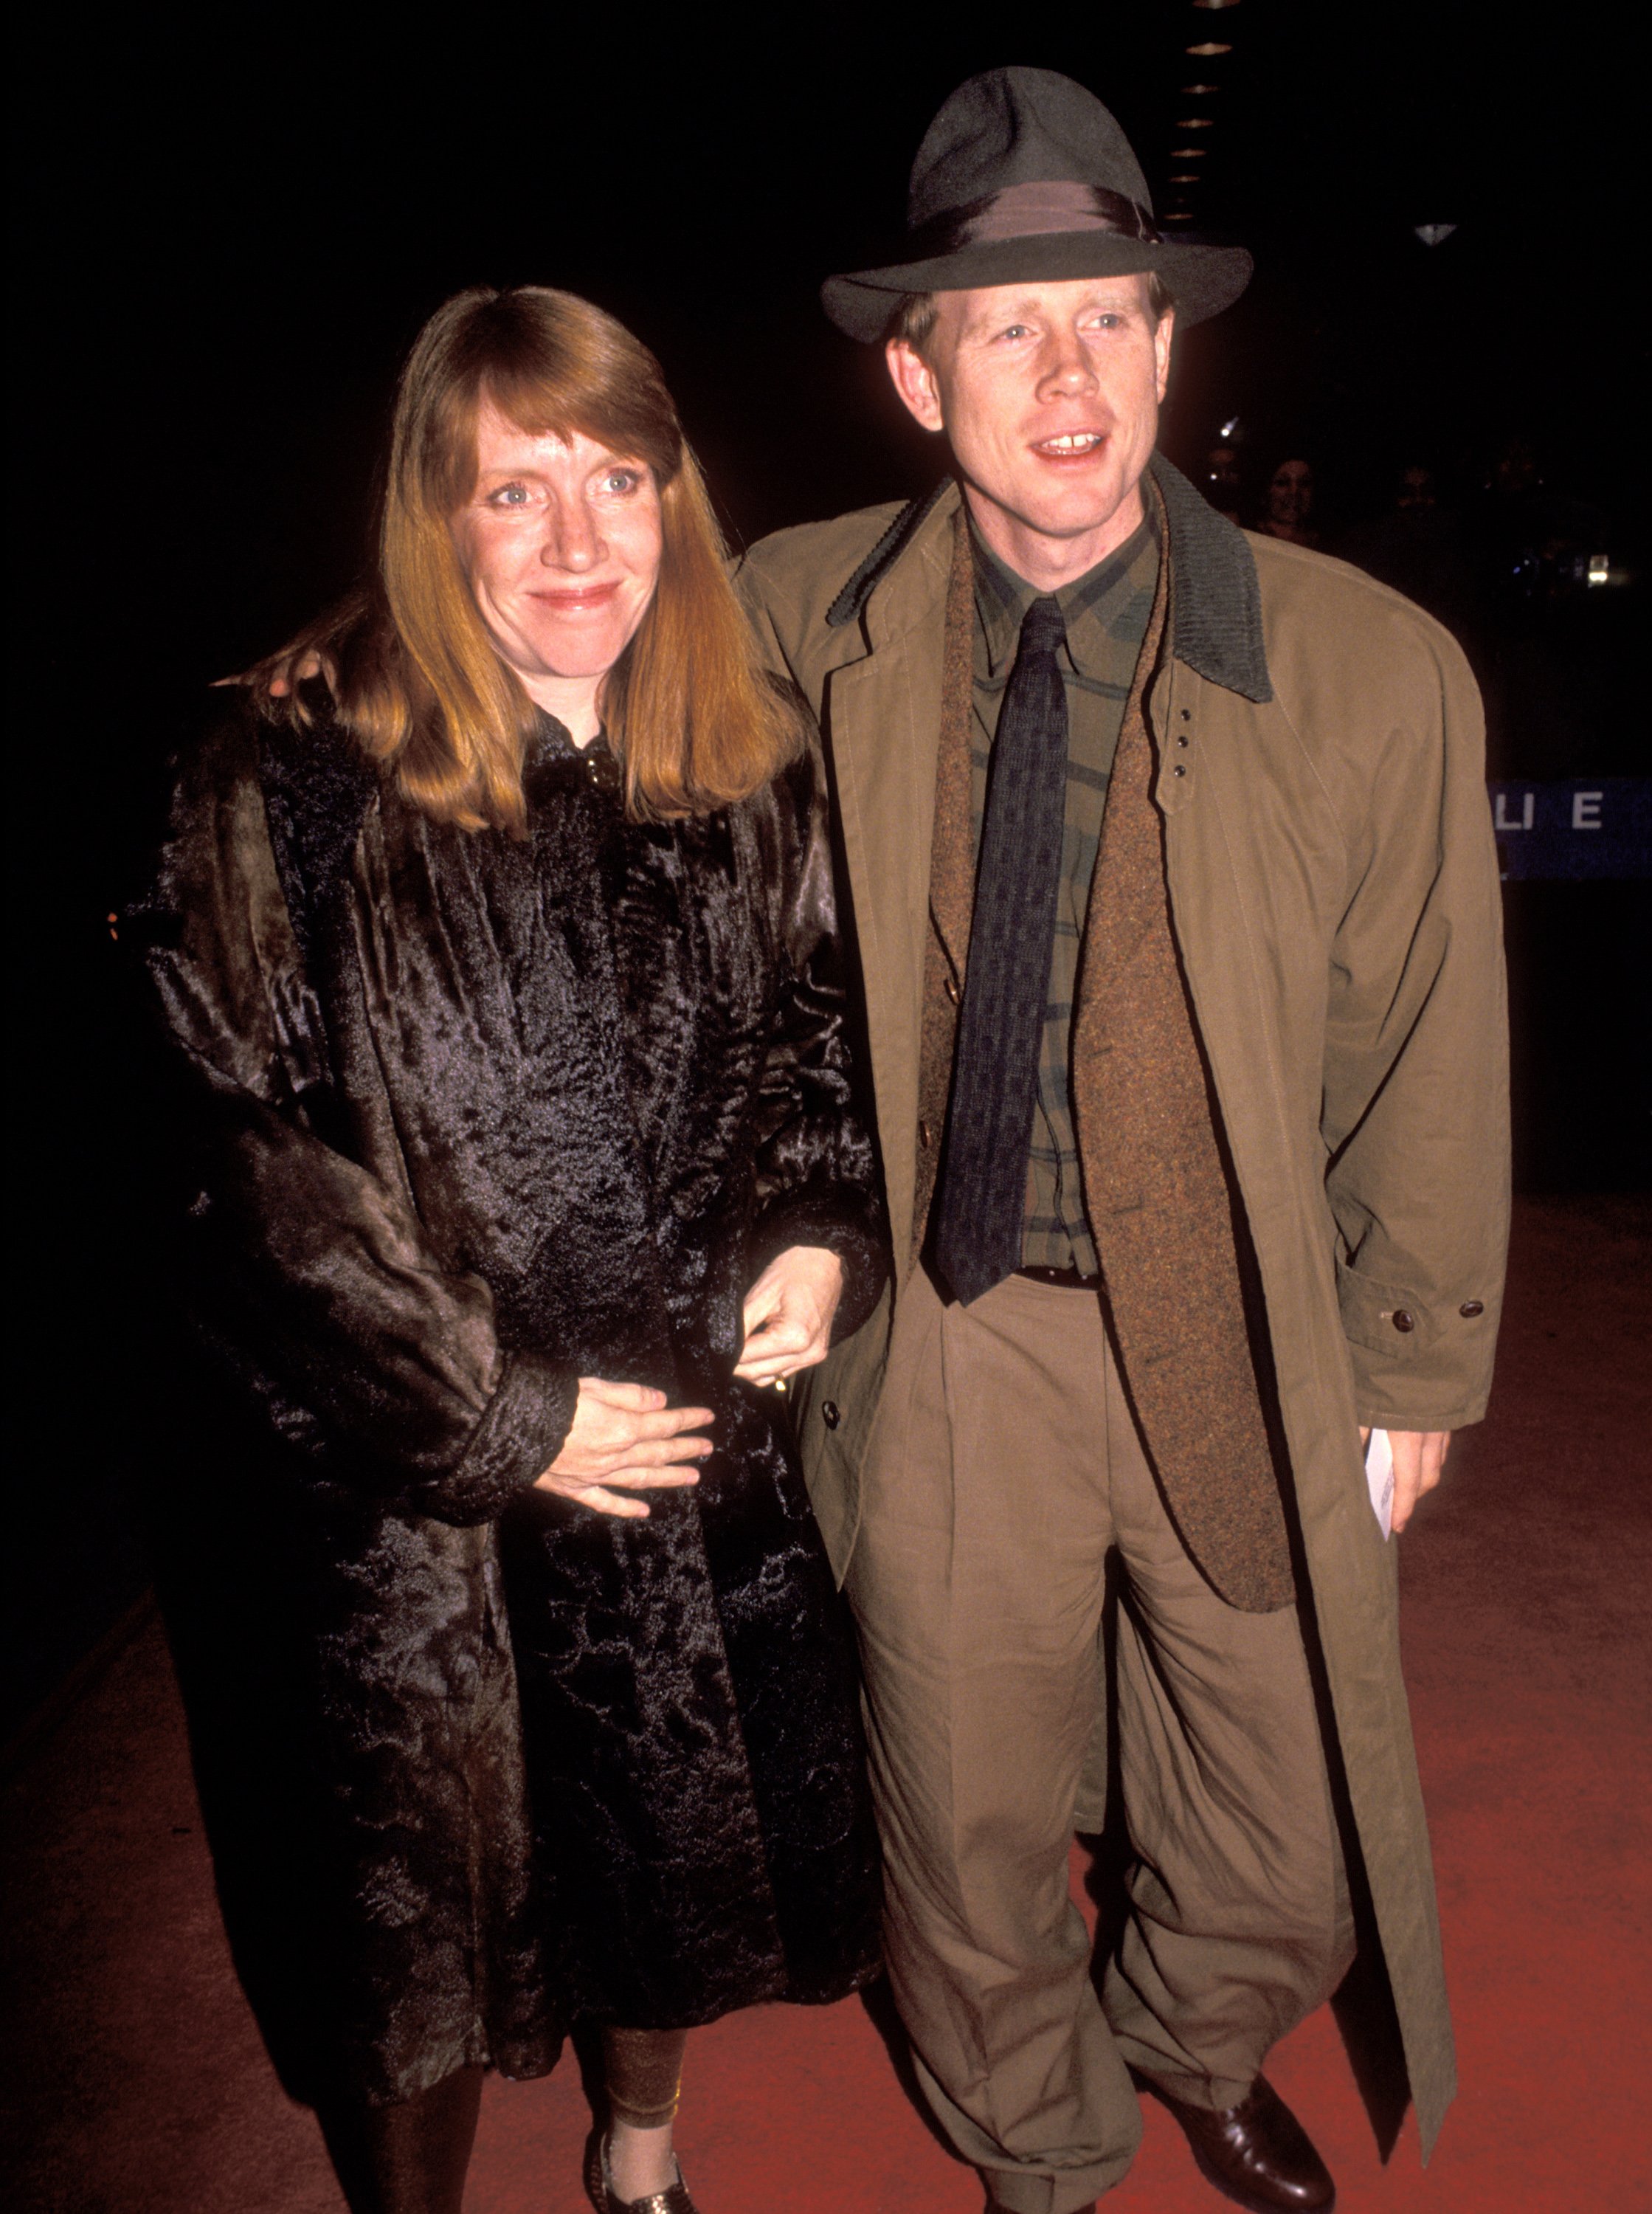 Ron Howard and Cheryl at the "JFK" New York screening on December 18, 1991 | Source: Getty Images